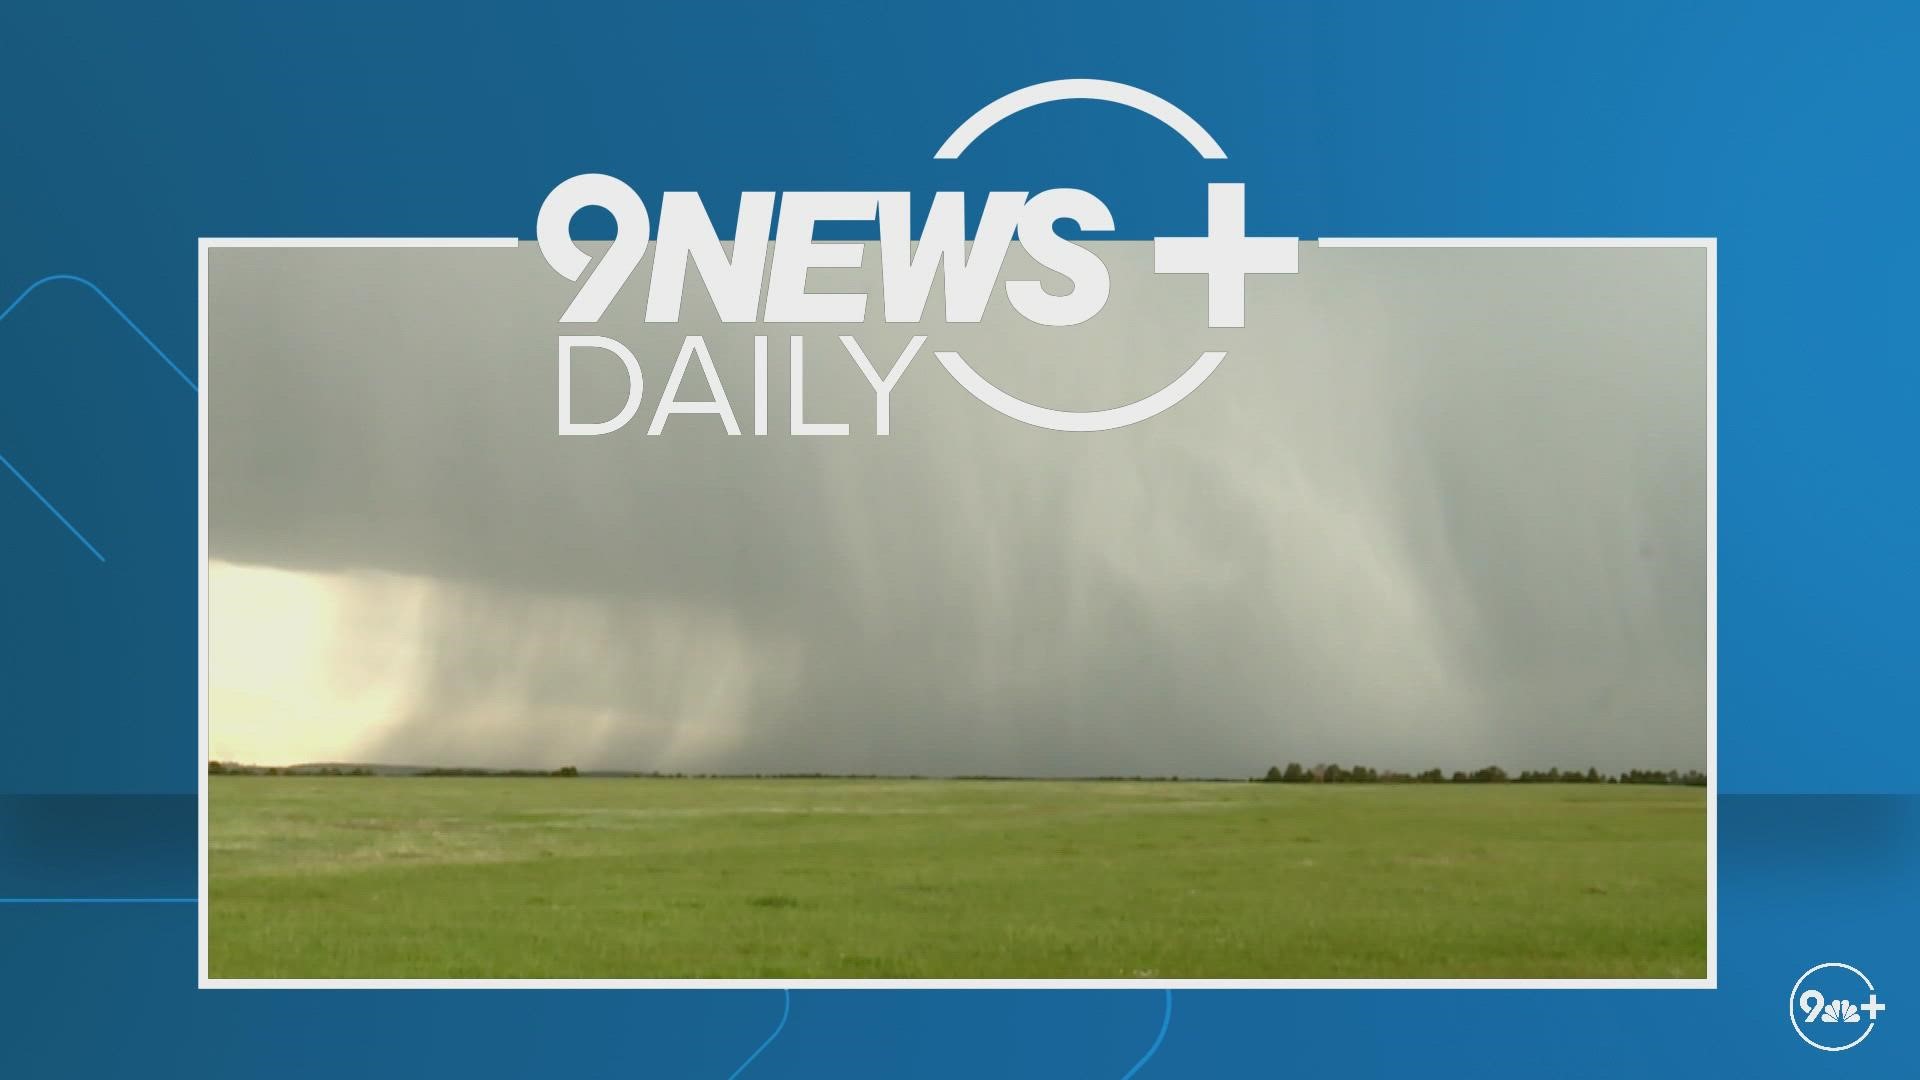 You’ve probably heard the word a lot, but do you know what the monsoon actually is? Meteorologist Chris Bianchi explains